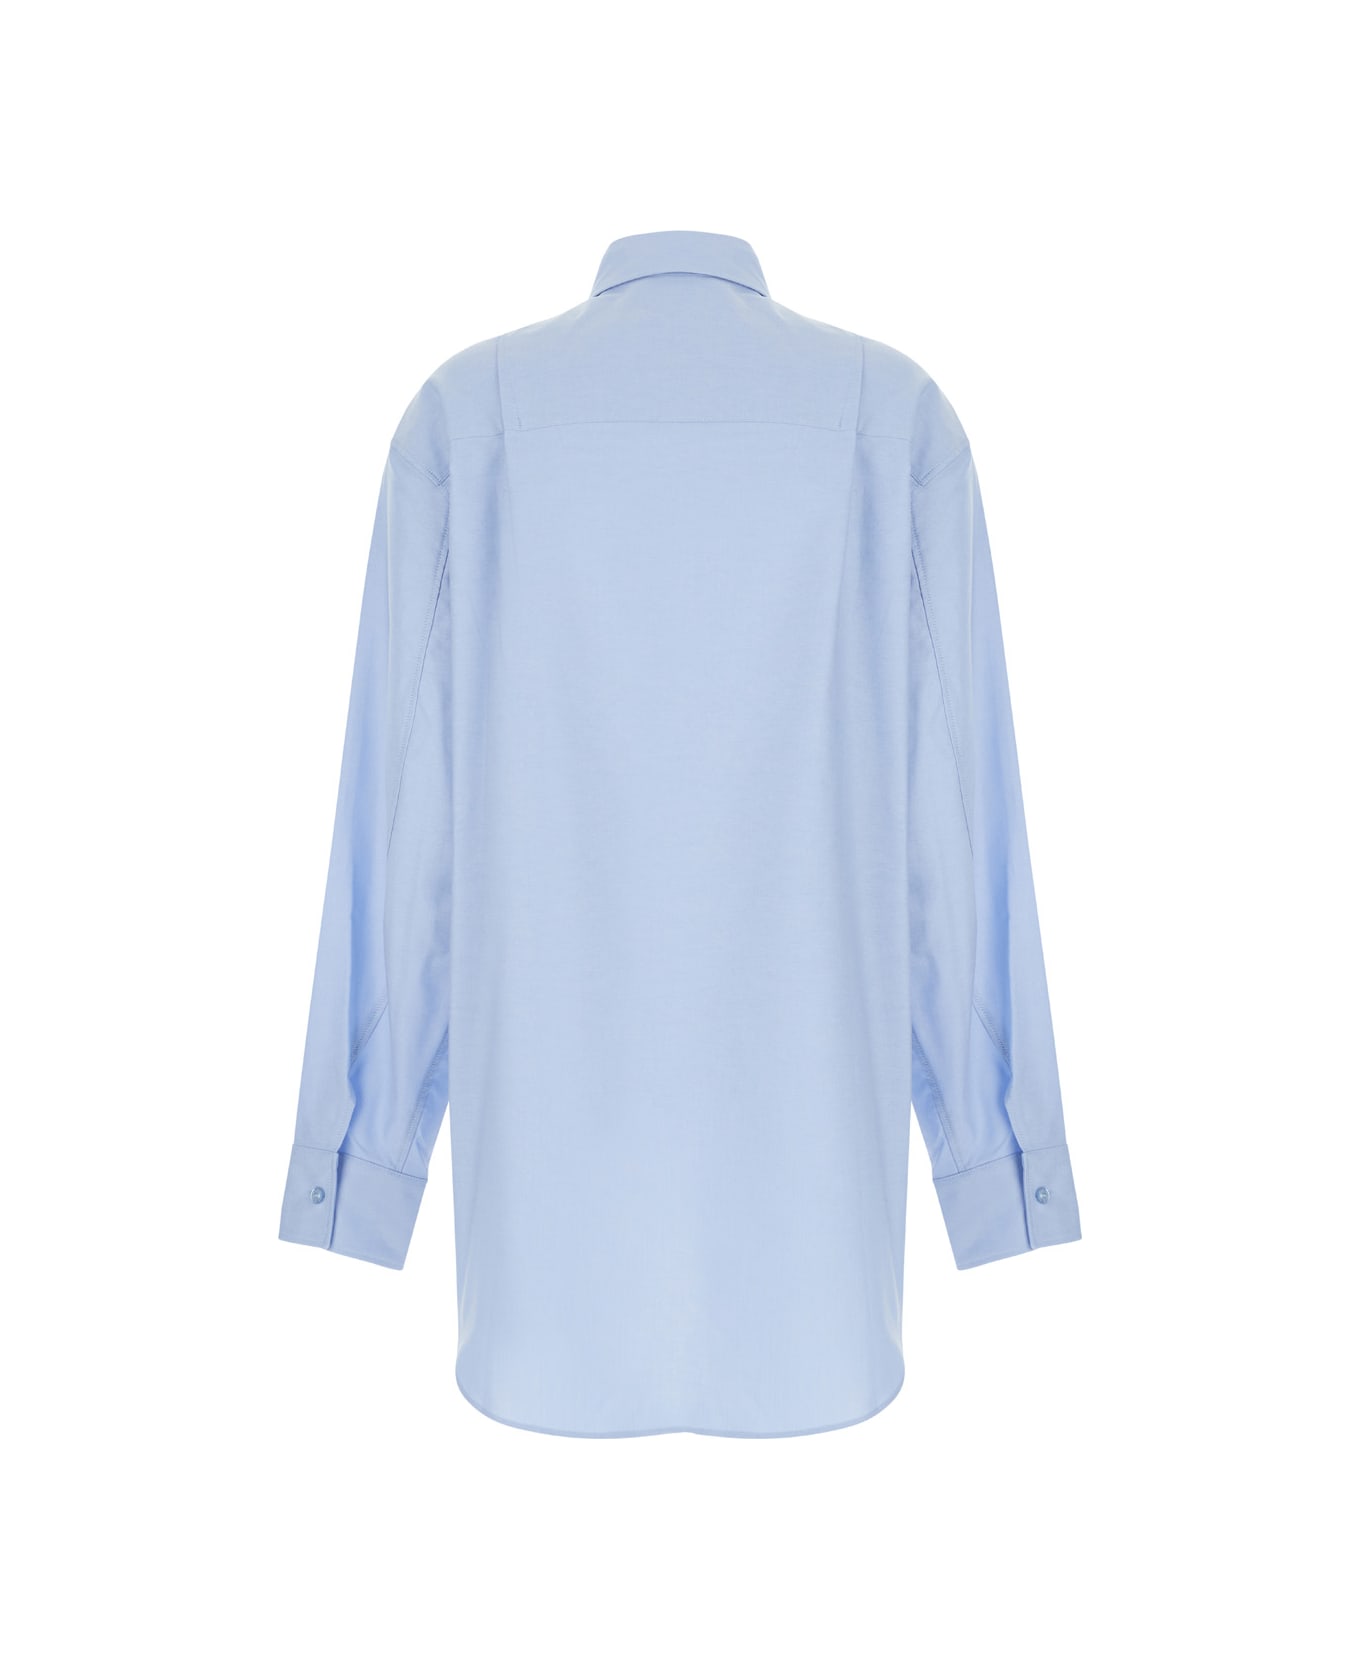 The Andamane Light Blue Shirt With Buttons In Cotton Blend Woman - Blu シャツ